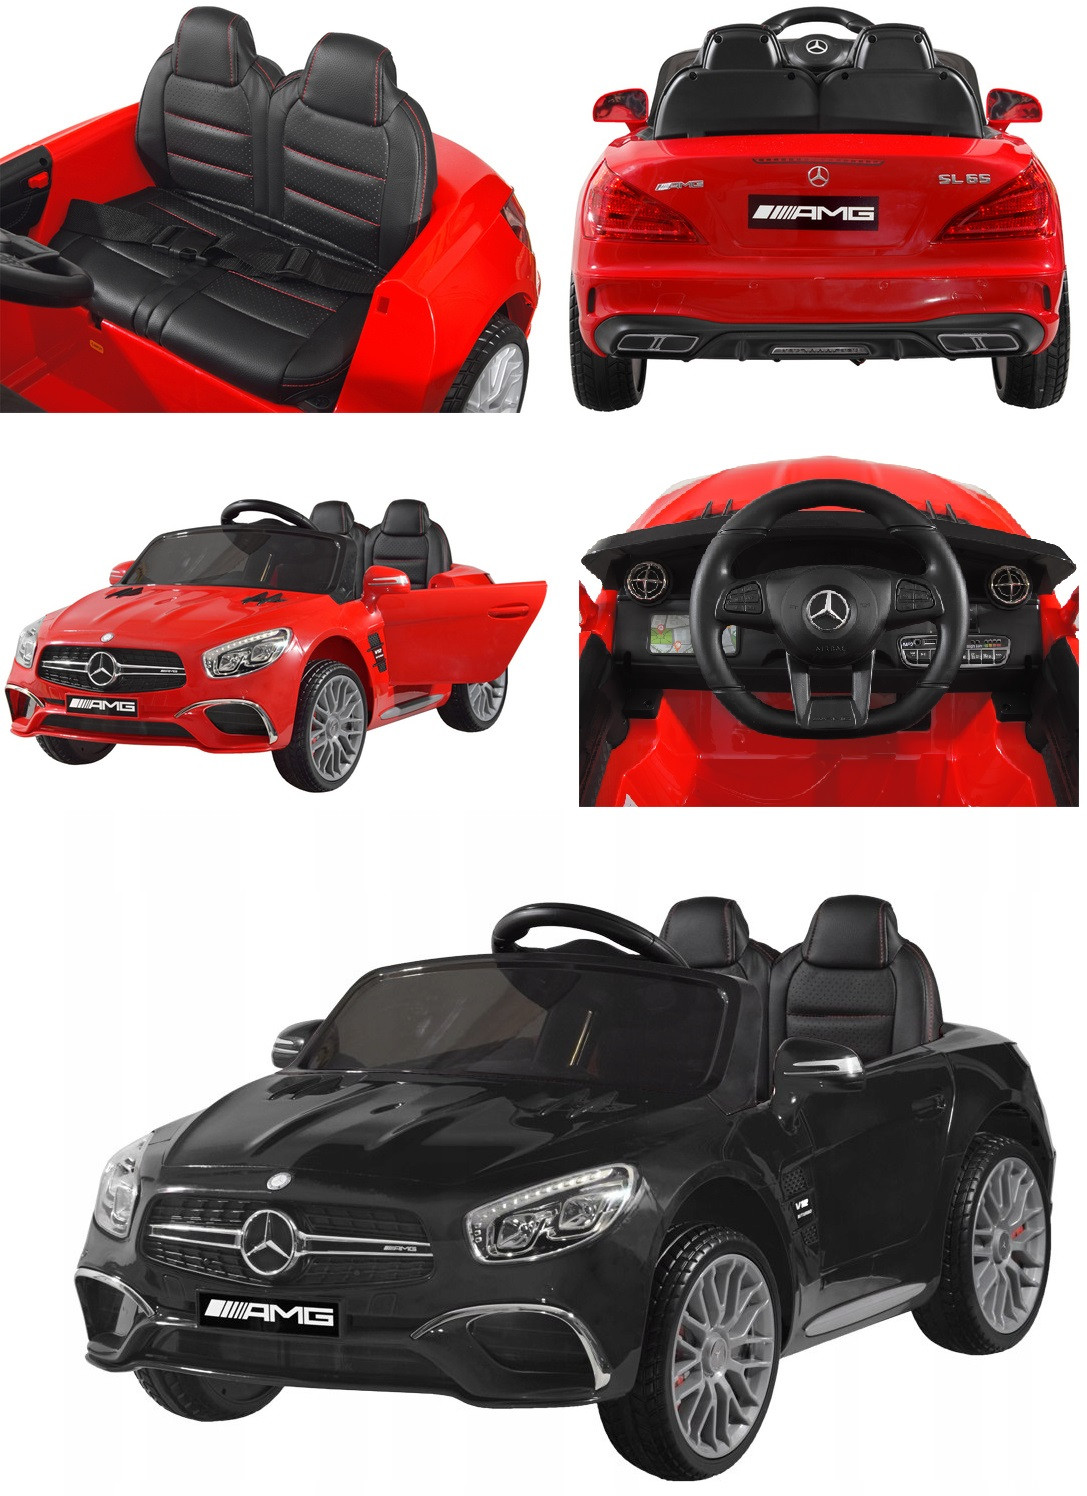 1eng pm A MERCEDES remote control car with rocking function PA0280 18563 5 - ABStore